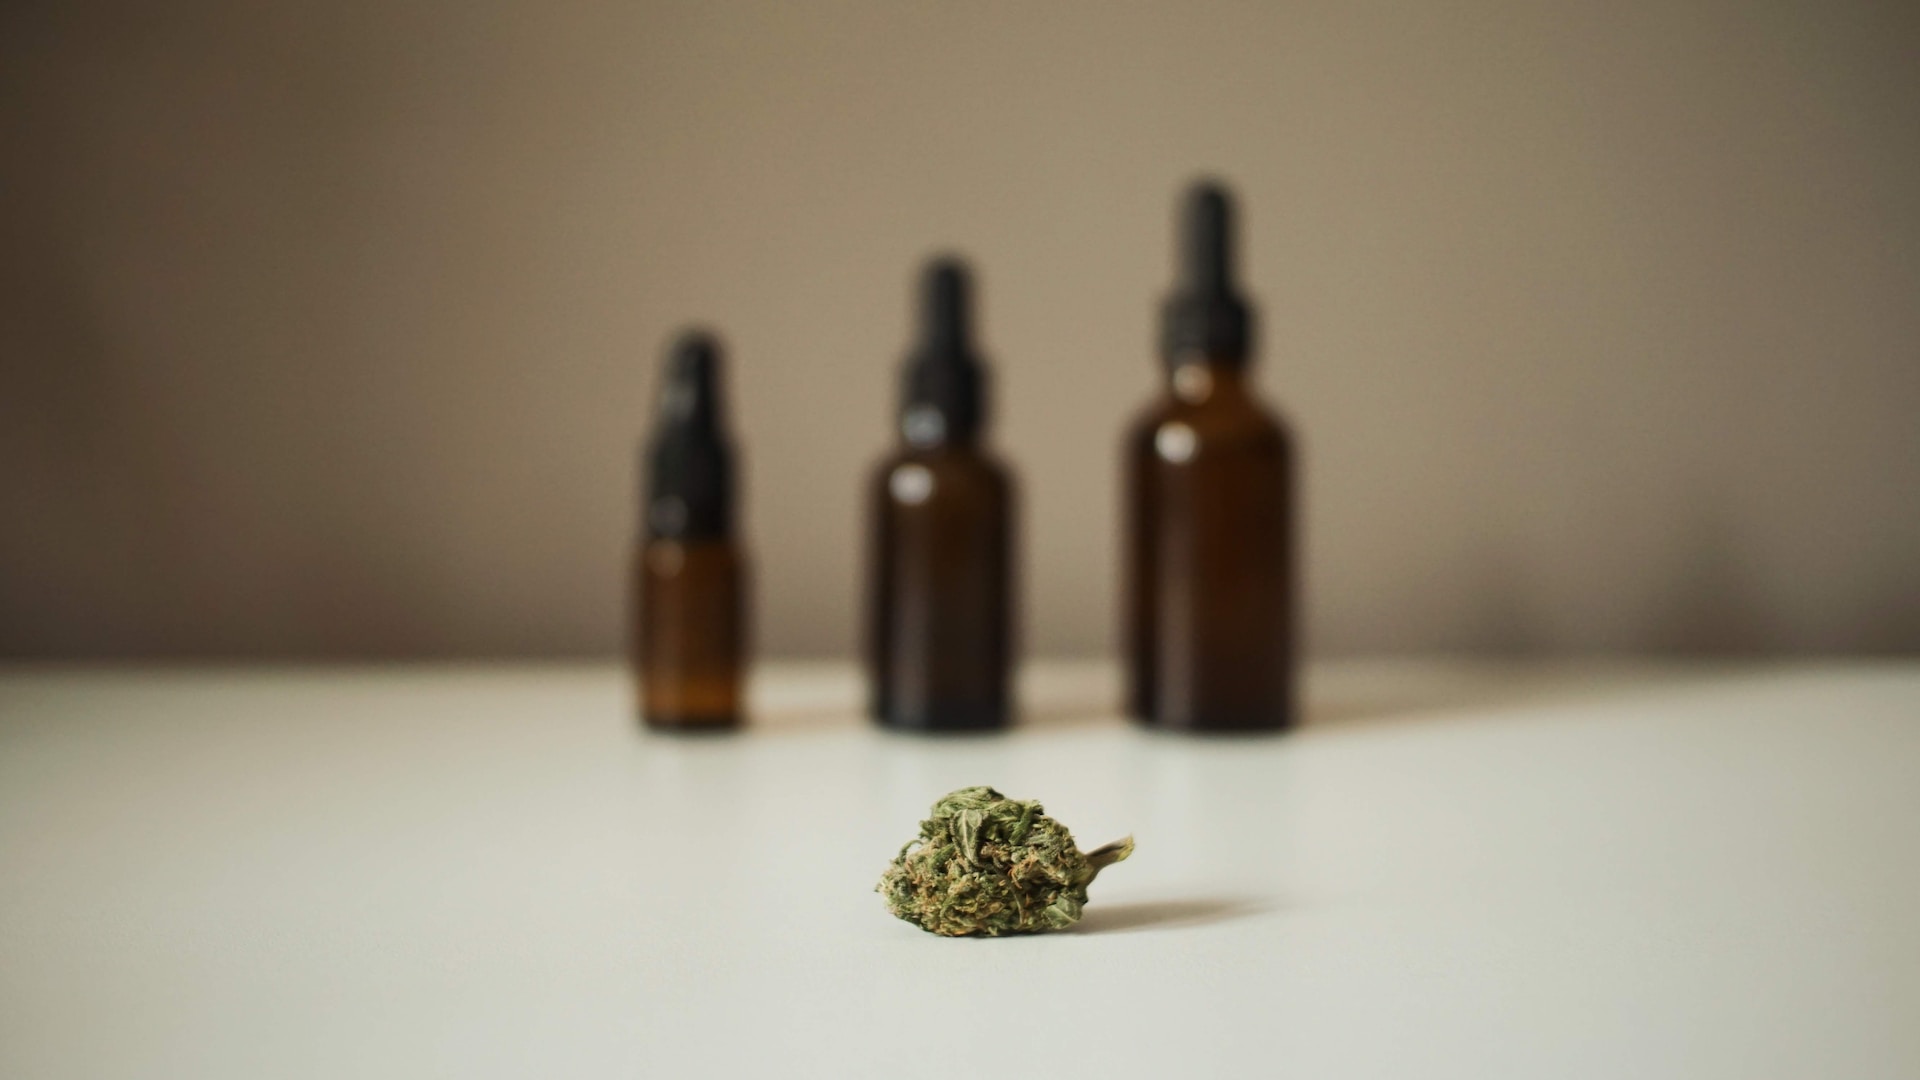 Weed bud in front of weed tinctures